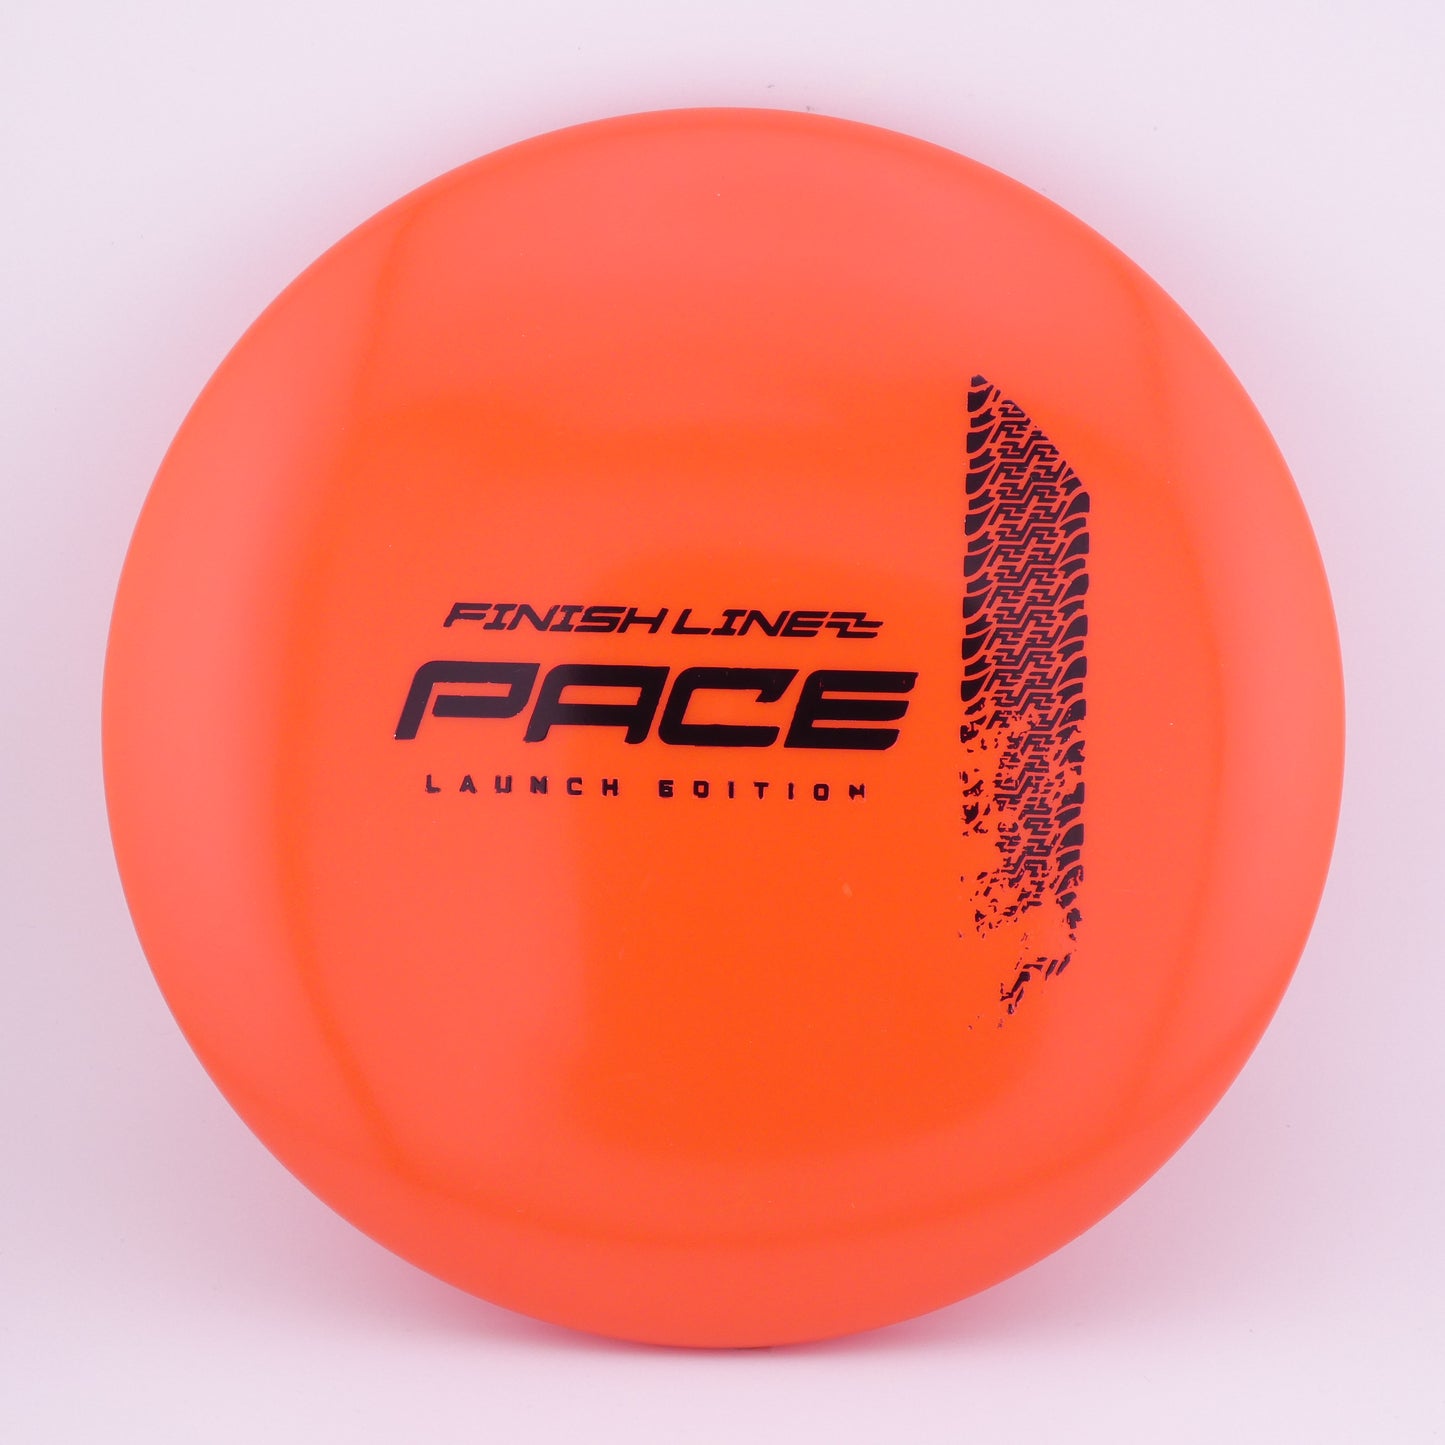 Forged Pace Prototype 173-176g